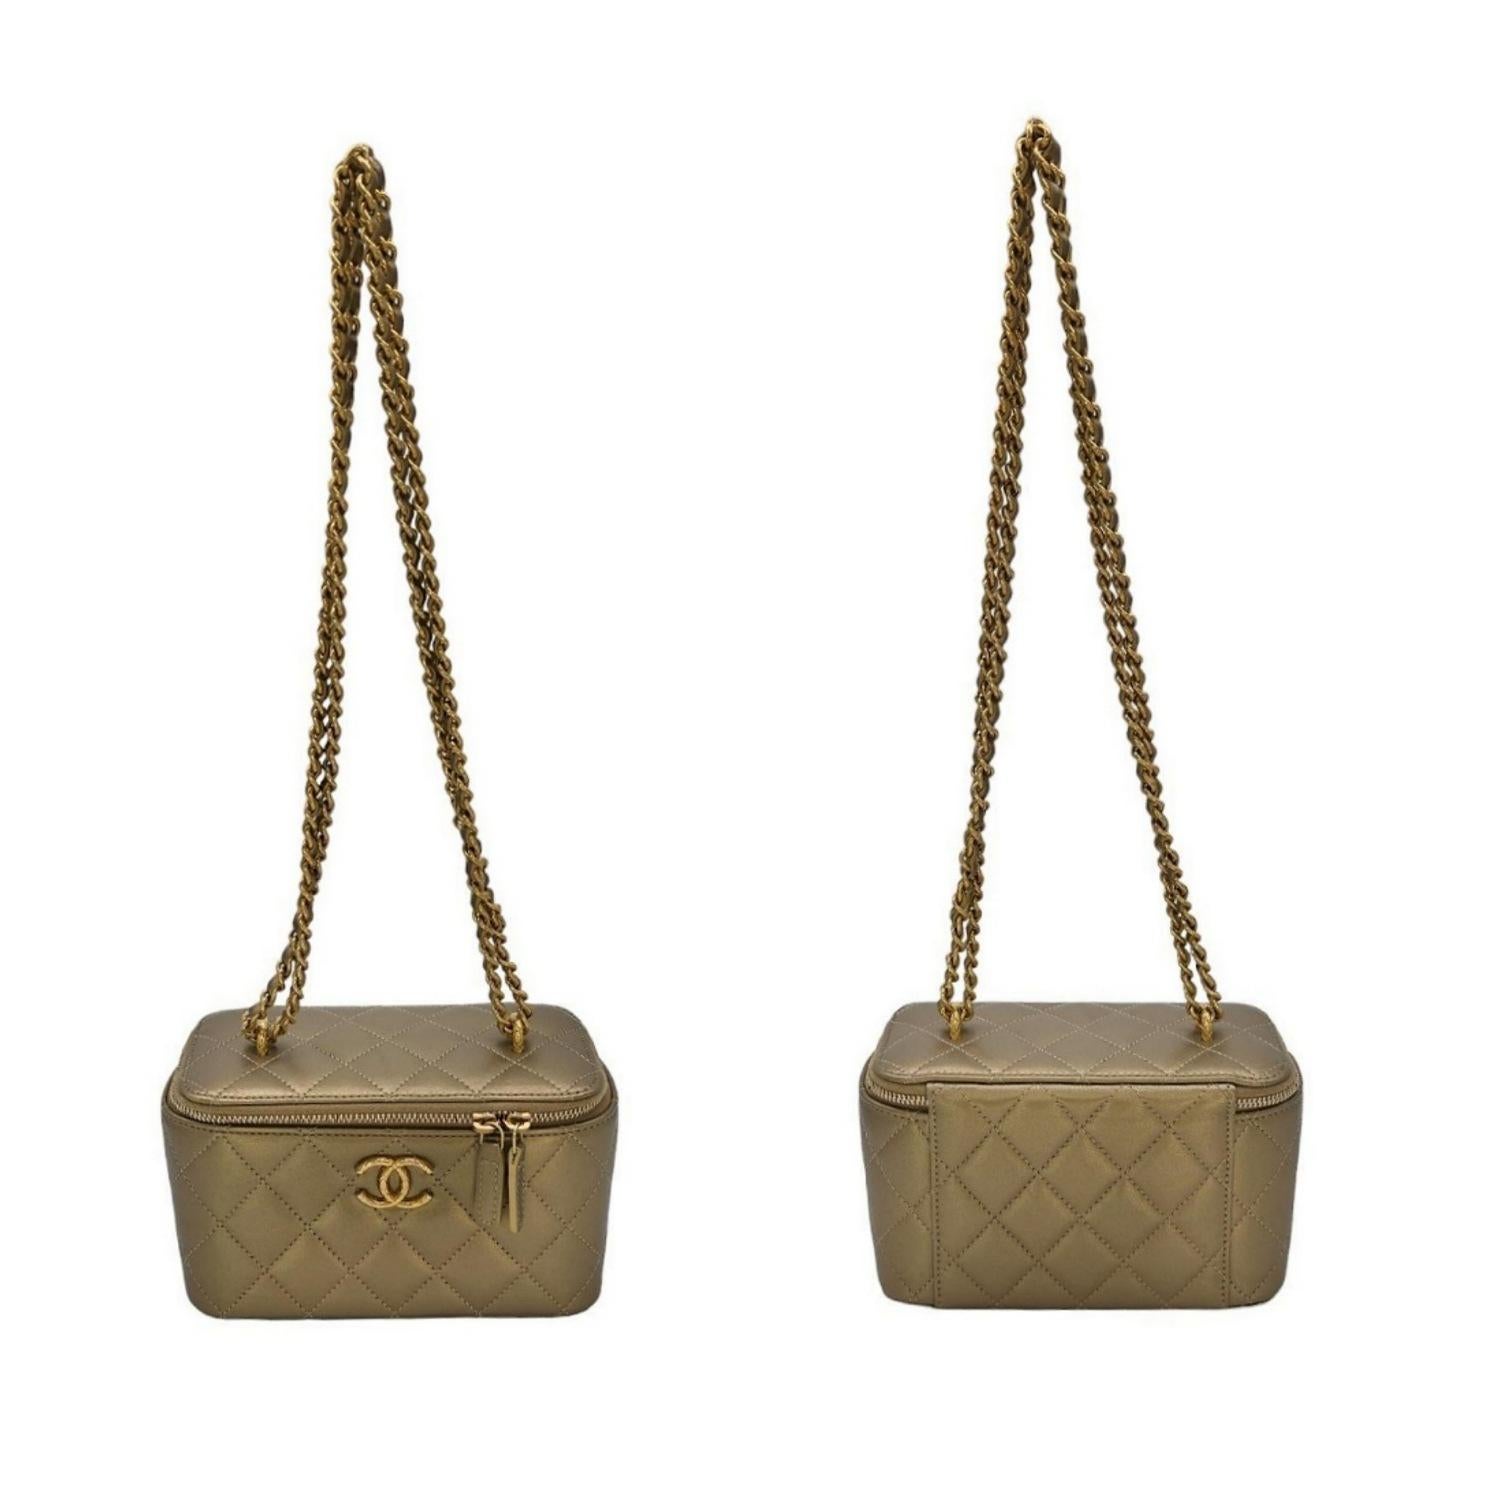 Chanel Metallic Quilted Lambskin Small Dynasty Vanity Case In Good Condition For Sale In Scottsdale, AZ